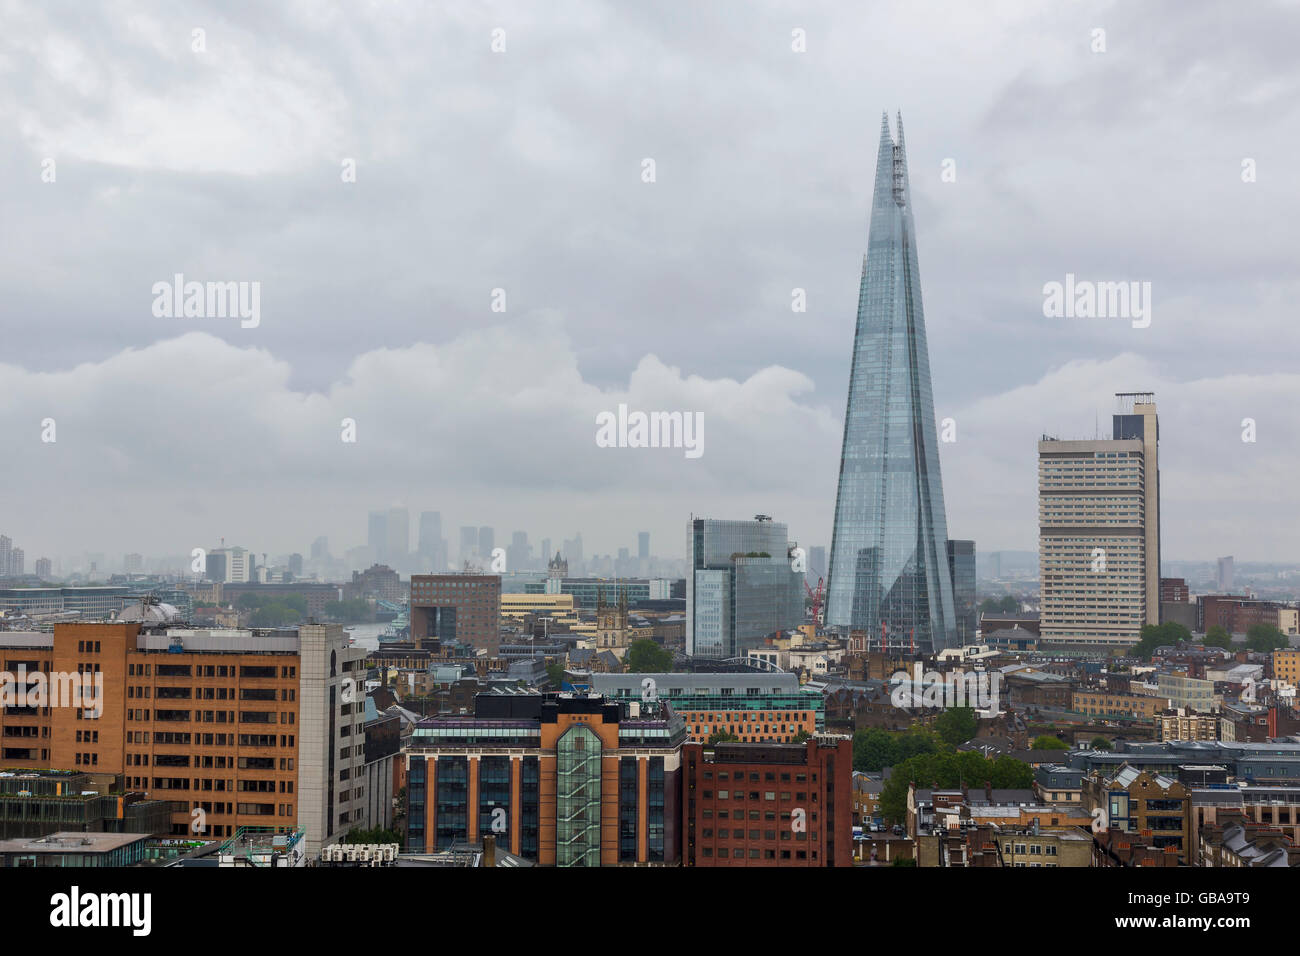 View of The Shard building from the Tate Modern - London, UK Stock Photo